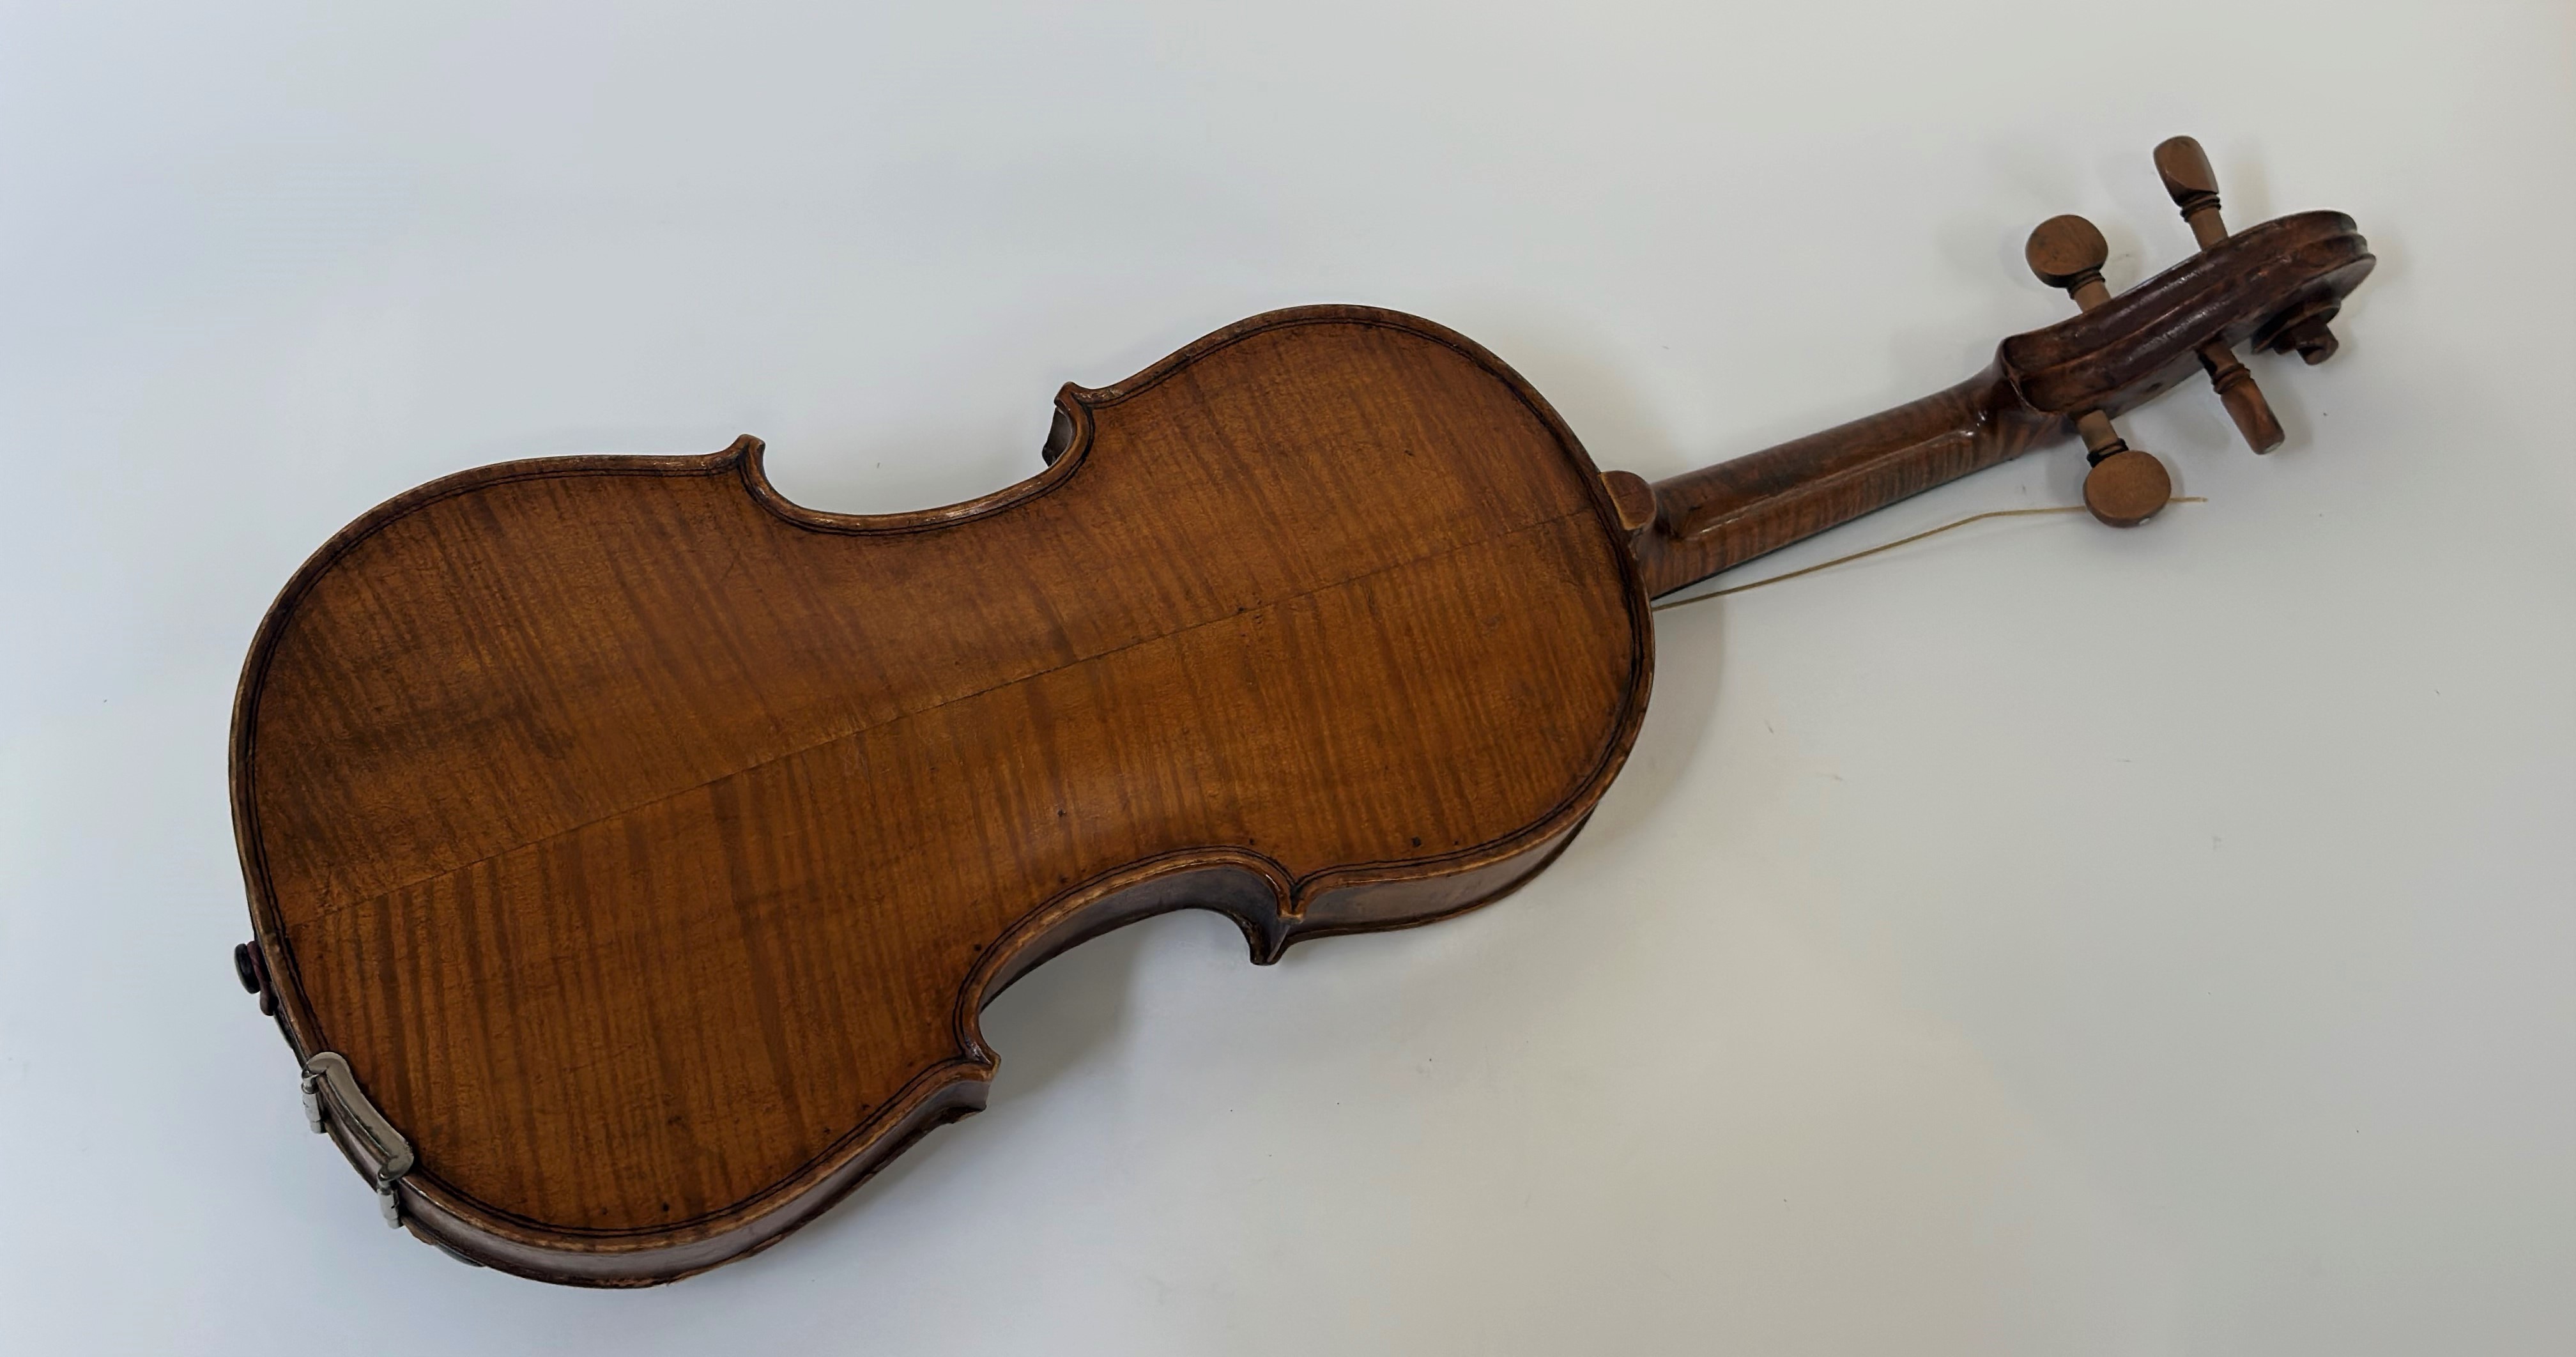 A 19th century violin, possibly Scottish, with two piece back, mother-of-pearl inlaid tailpiece, - Image 4 of 5